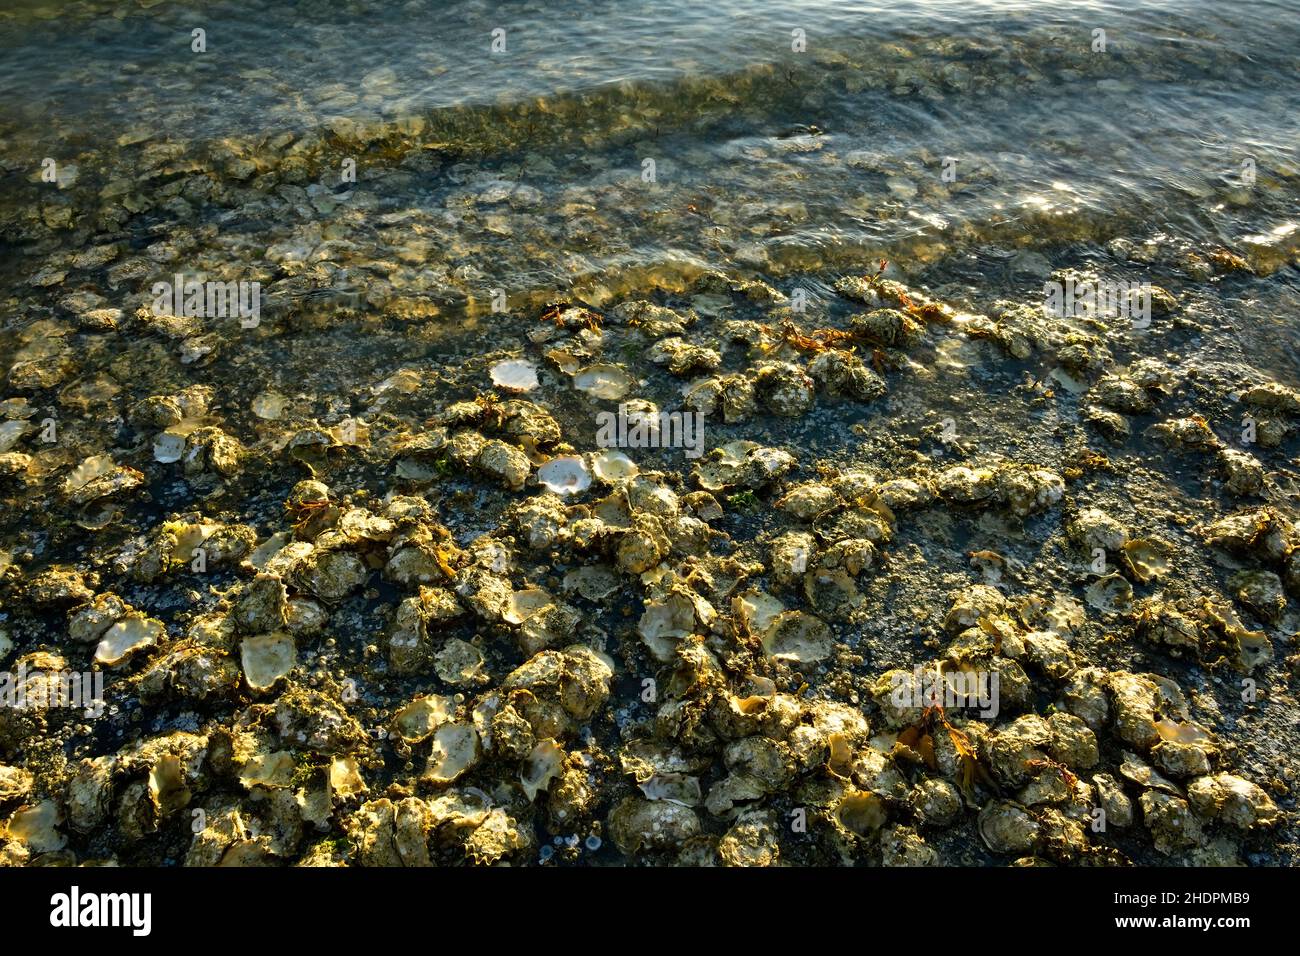 Wild oysters clinging to a rocky beach on the east coast of Vancouver Island on Vancouver Island in British Columbia Canada Stock Photo